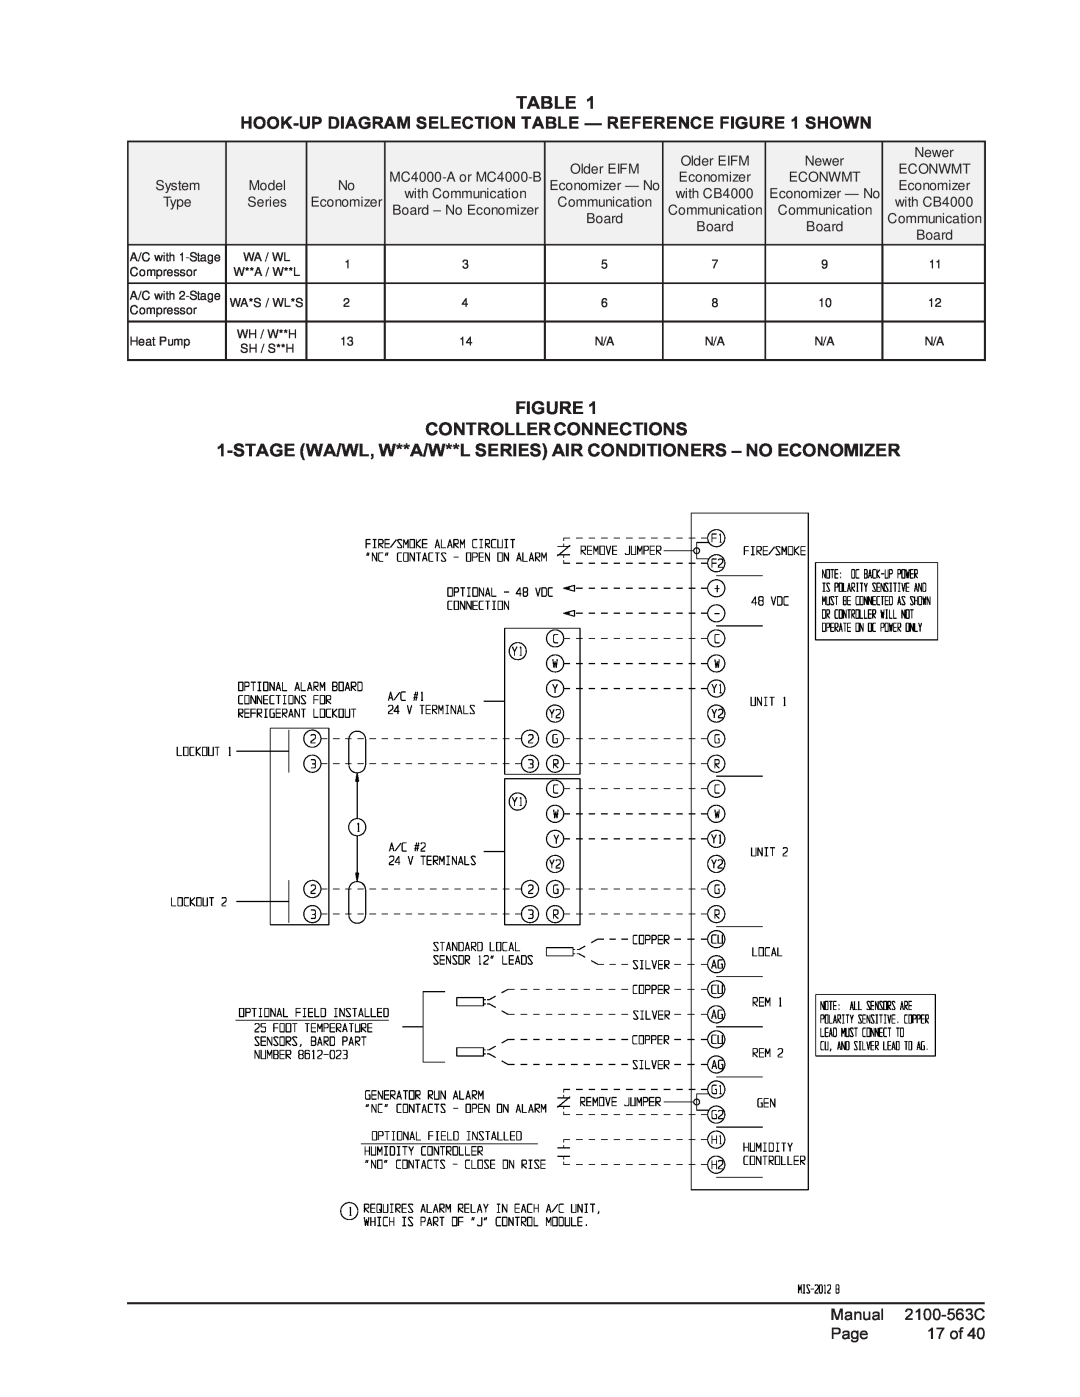 Bard MC4000 installation instructions Figure Controllerconnections, Manual, Page, 17 of, 2100-563C 